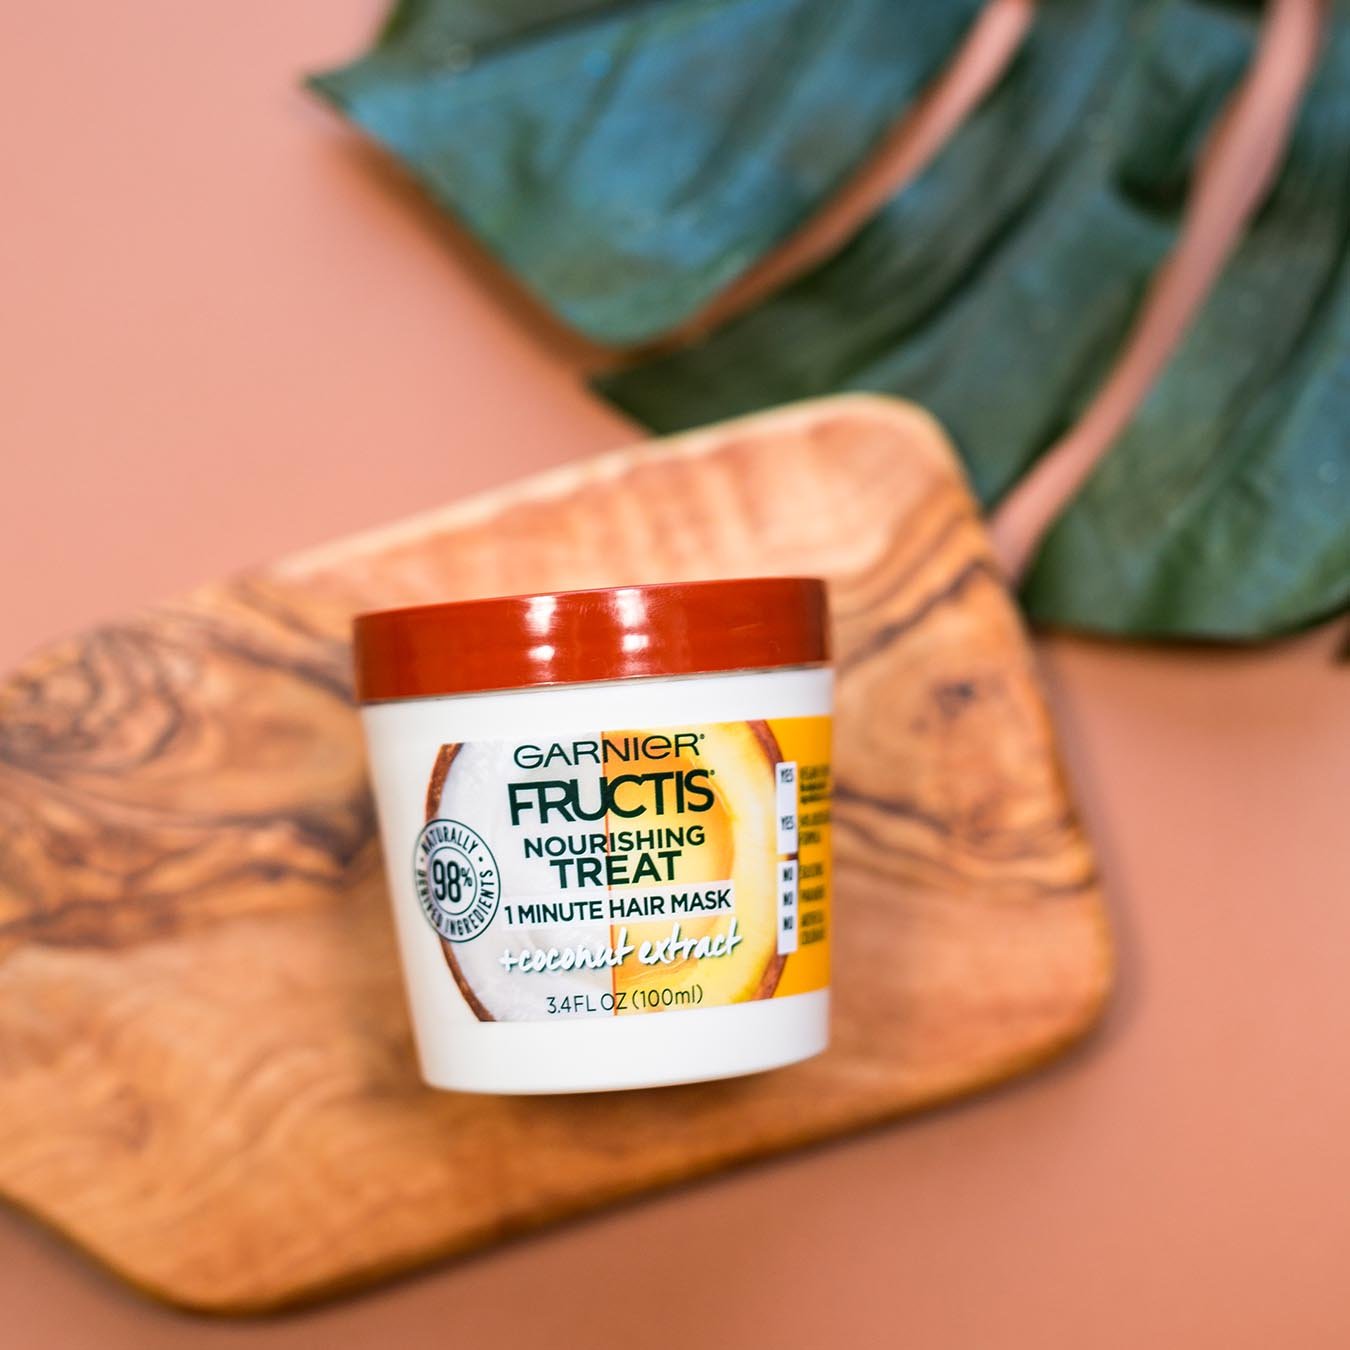 Garnier Fructis Nourishing Treat 1 Minute Hair Mask with Coconut Extract on a wooden cutting board beside a palm frond on a muted red background.